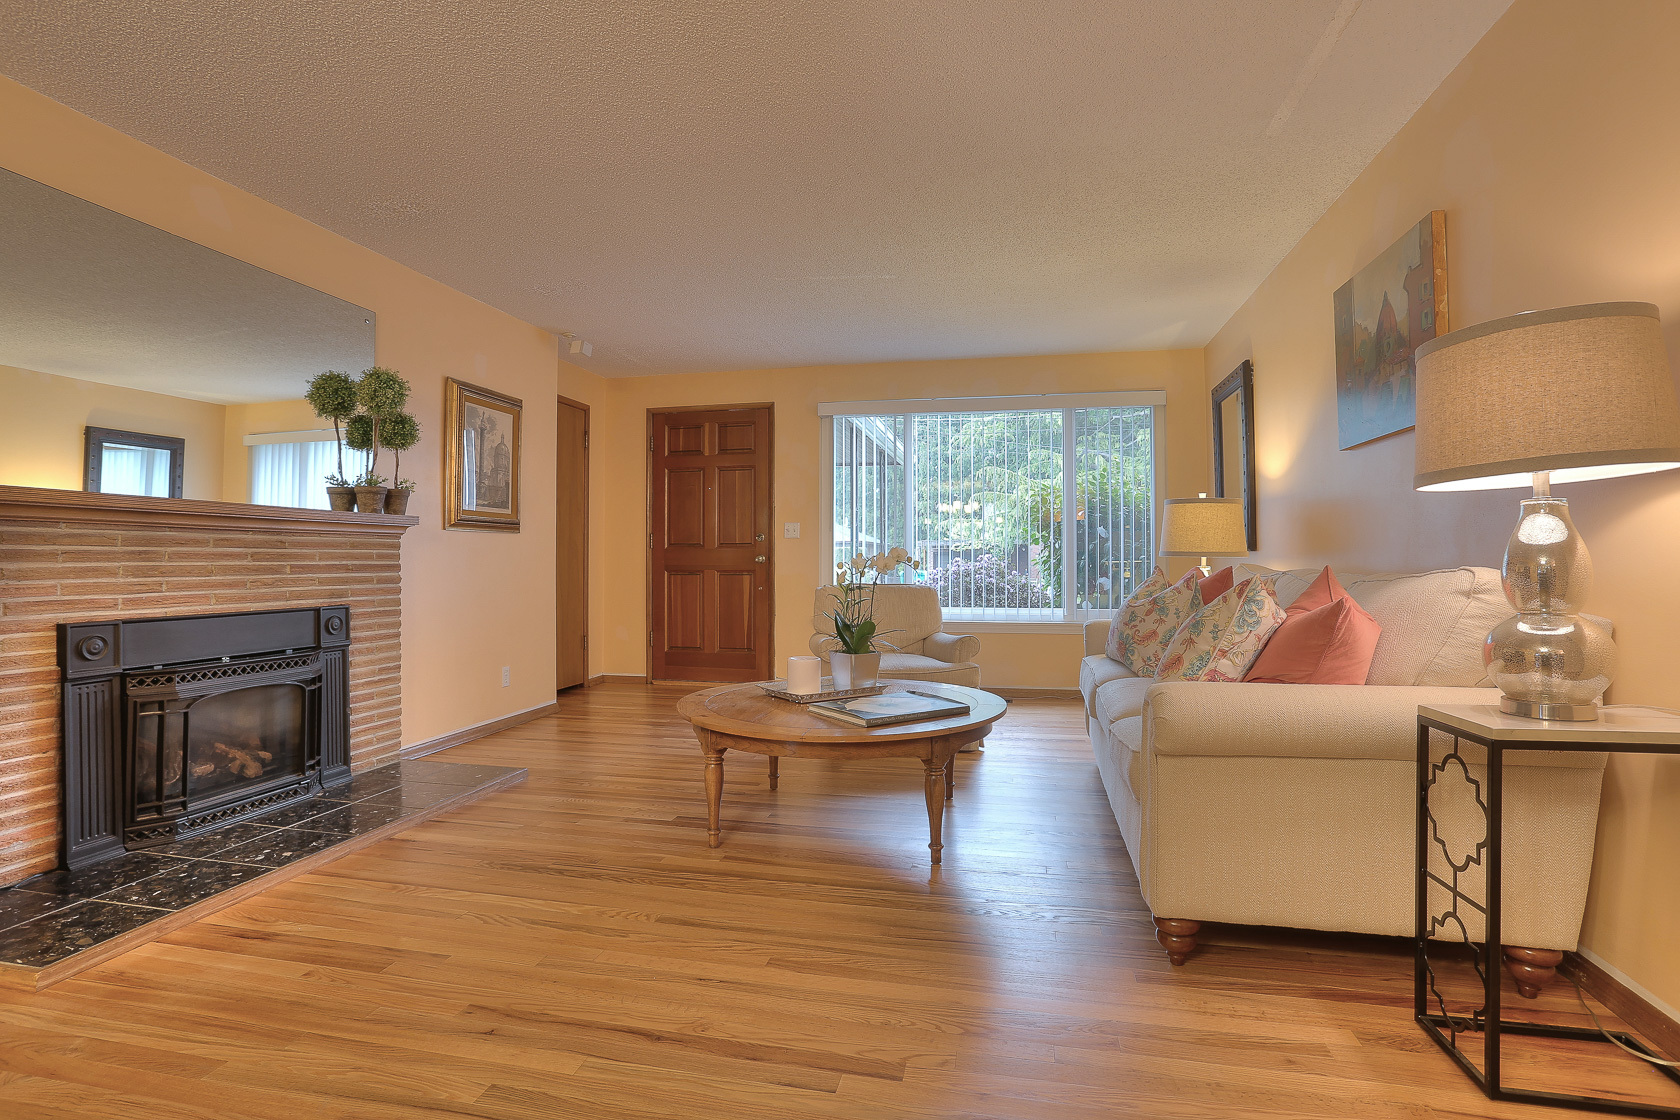 Property Photo: Living Room 10029 13th Ave NW  WA 98177 